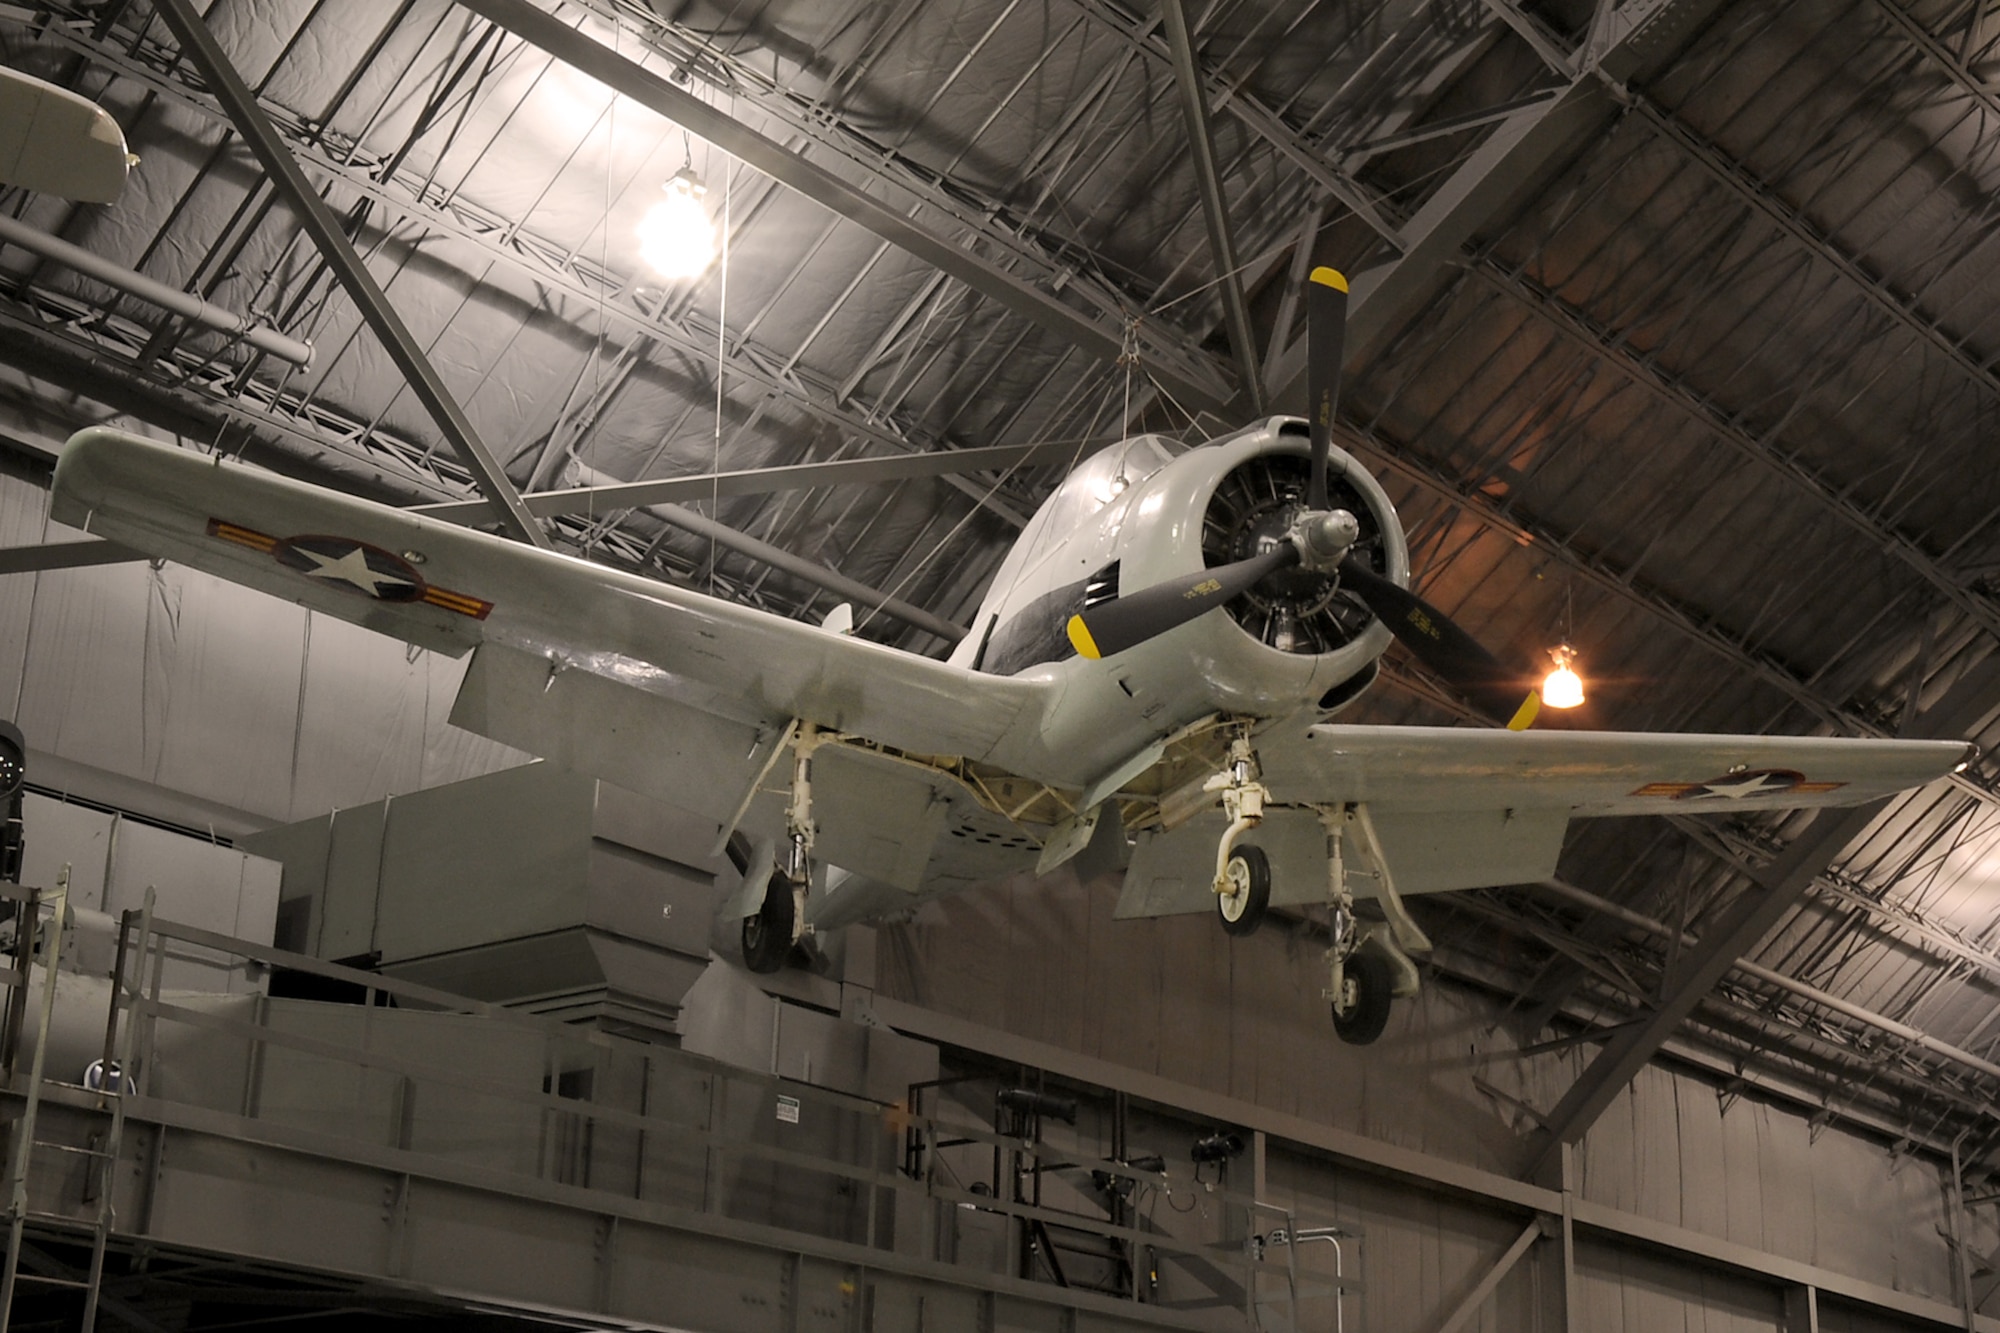 DAYTON, Ohio -- North American T-28B in the Southeast Asia War Gallery at the National Museum of the United States Air Force. (U.S. Air Force photo)
